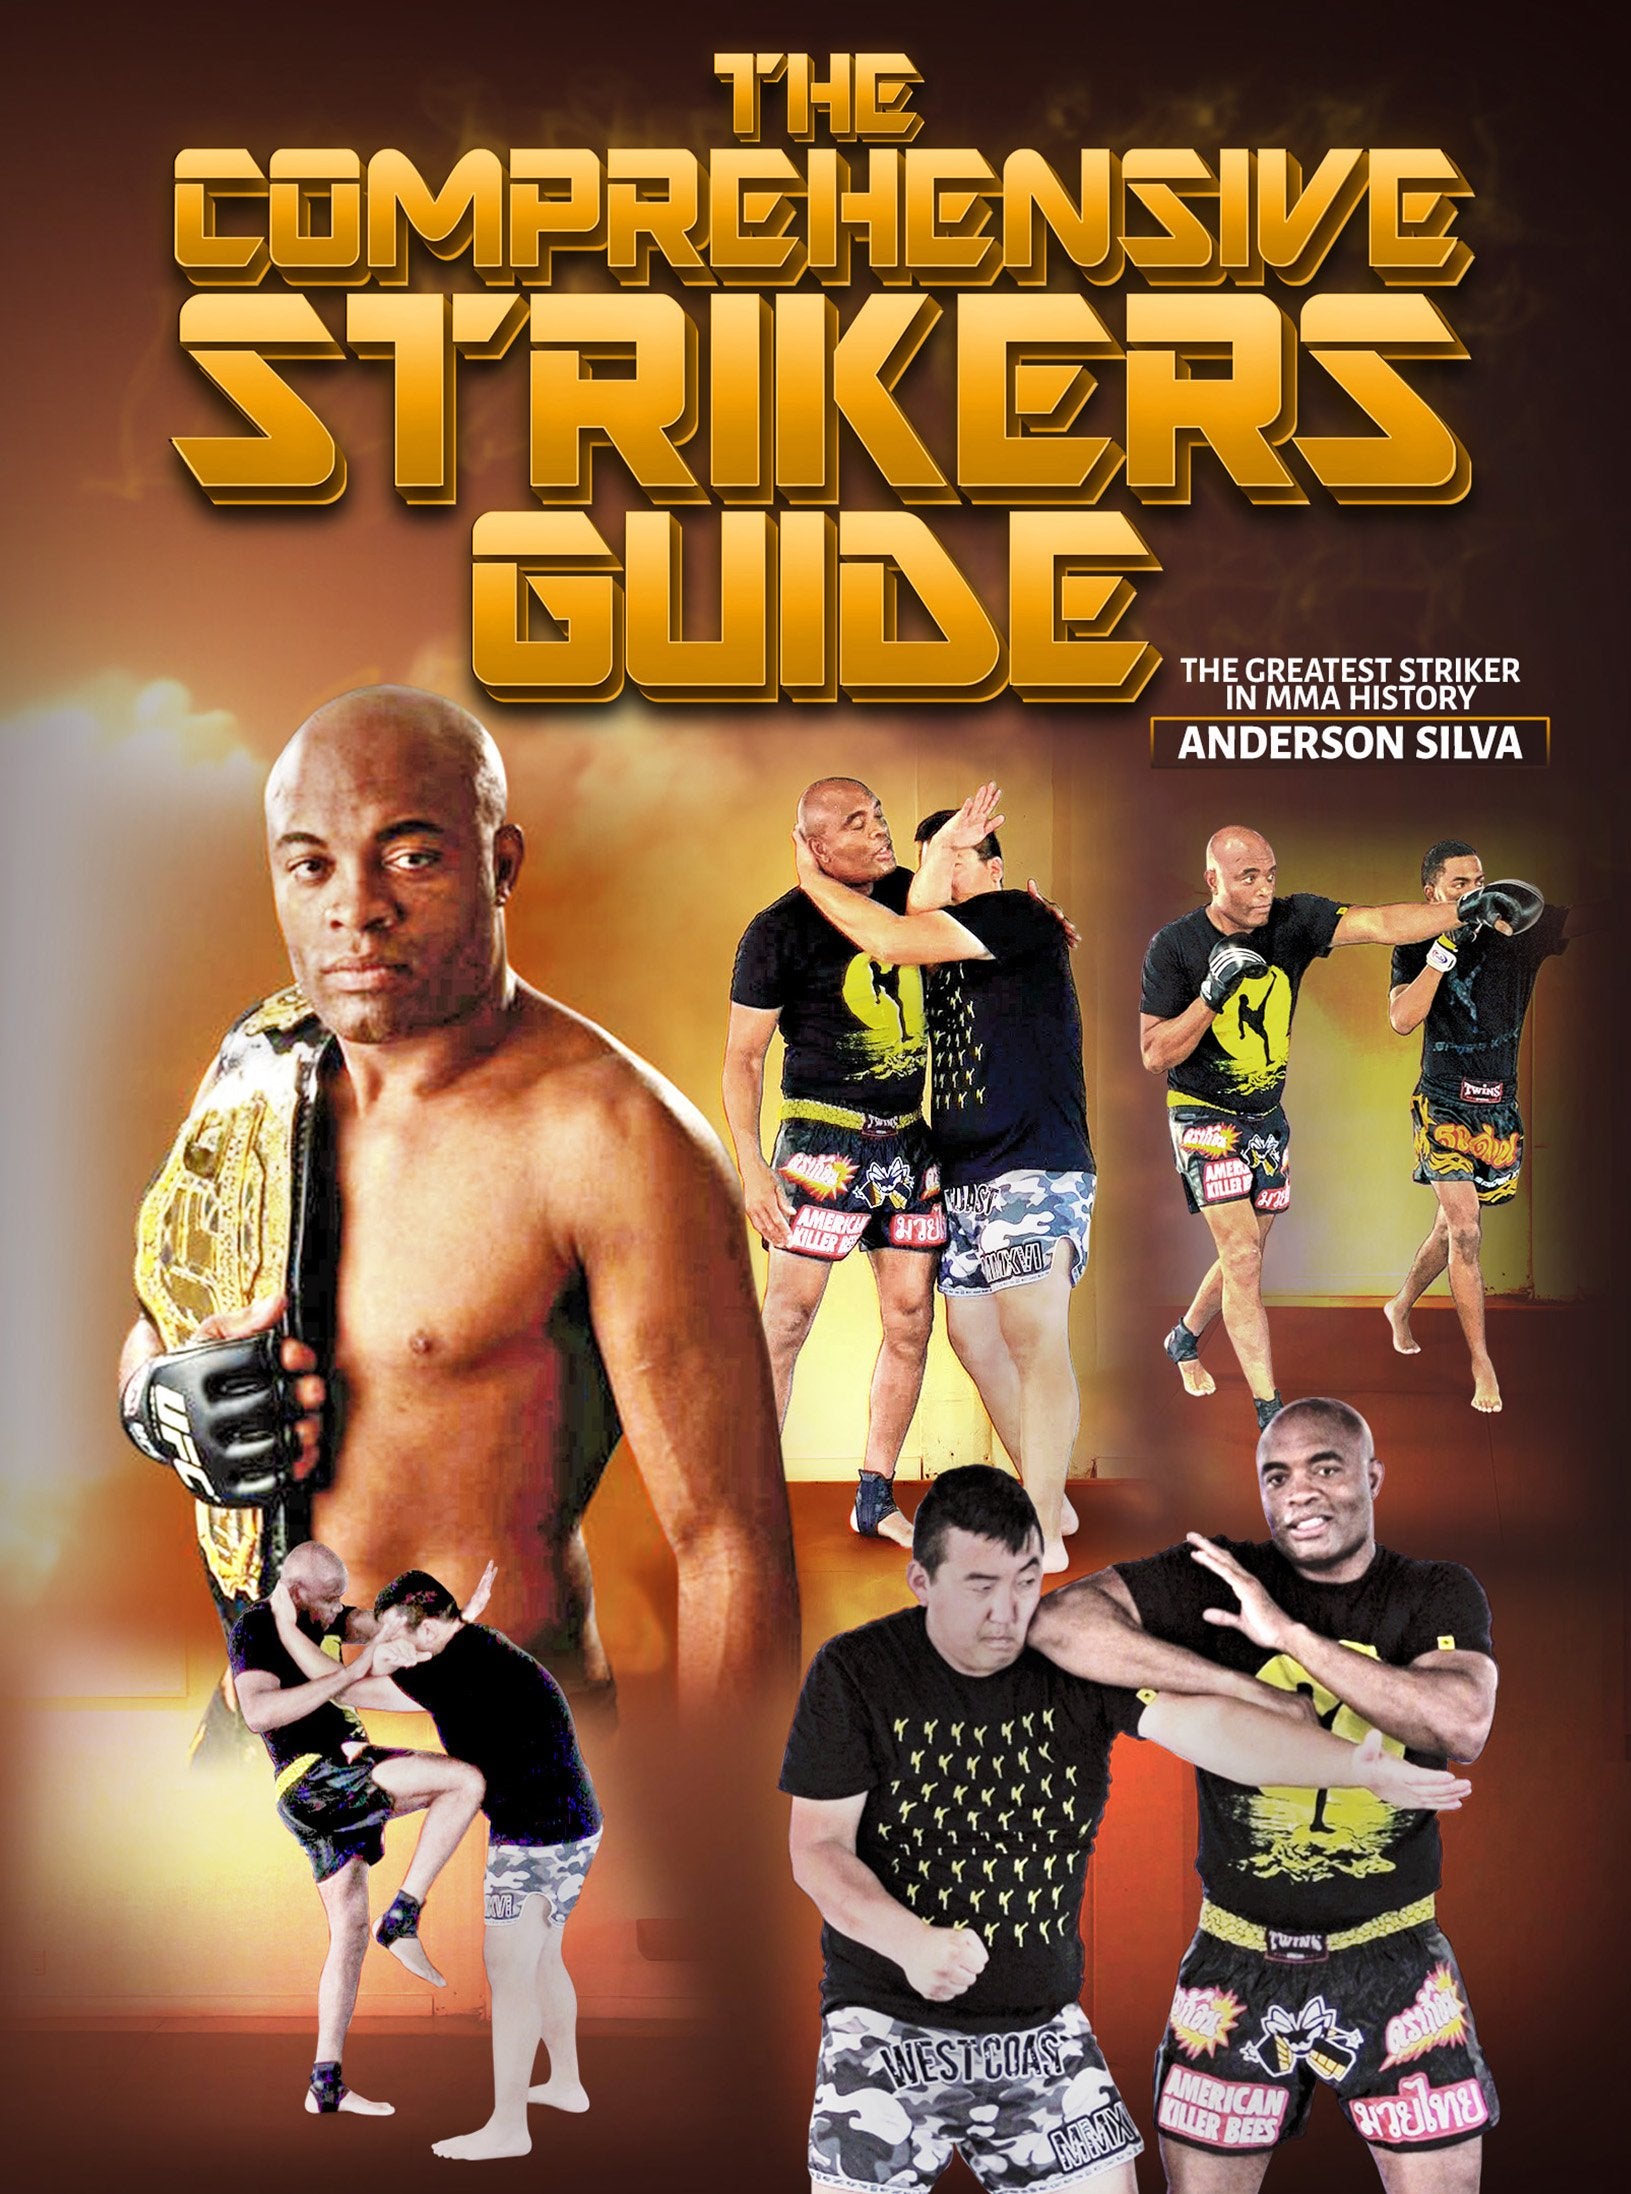 The Comprehensive Strikers Guide by Anderson Silva – Dynamic Striking